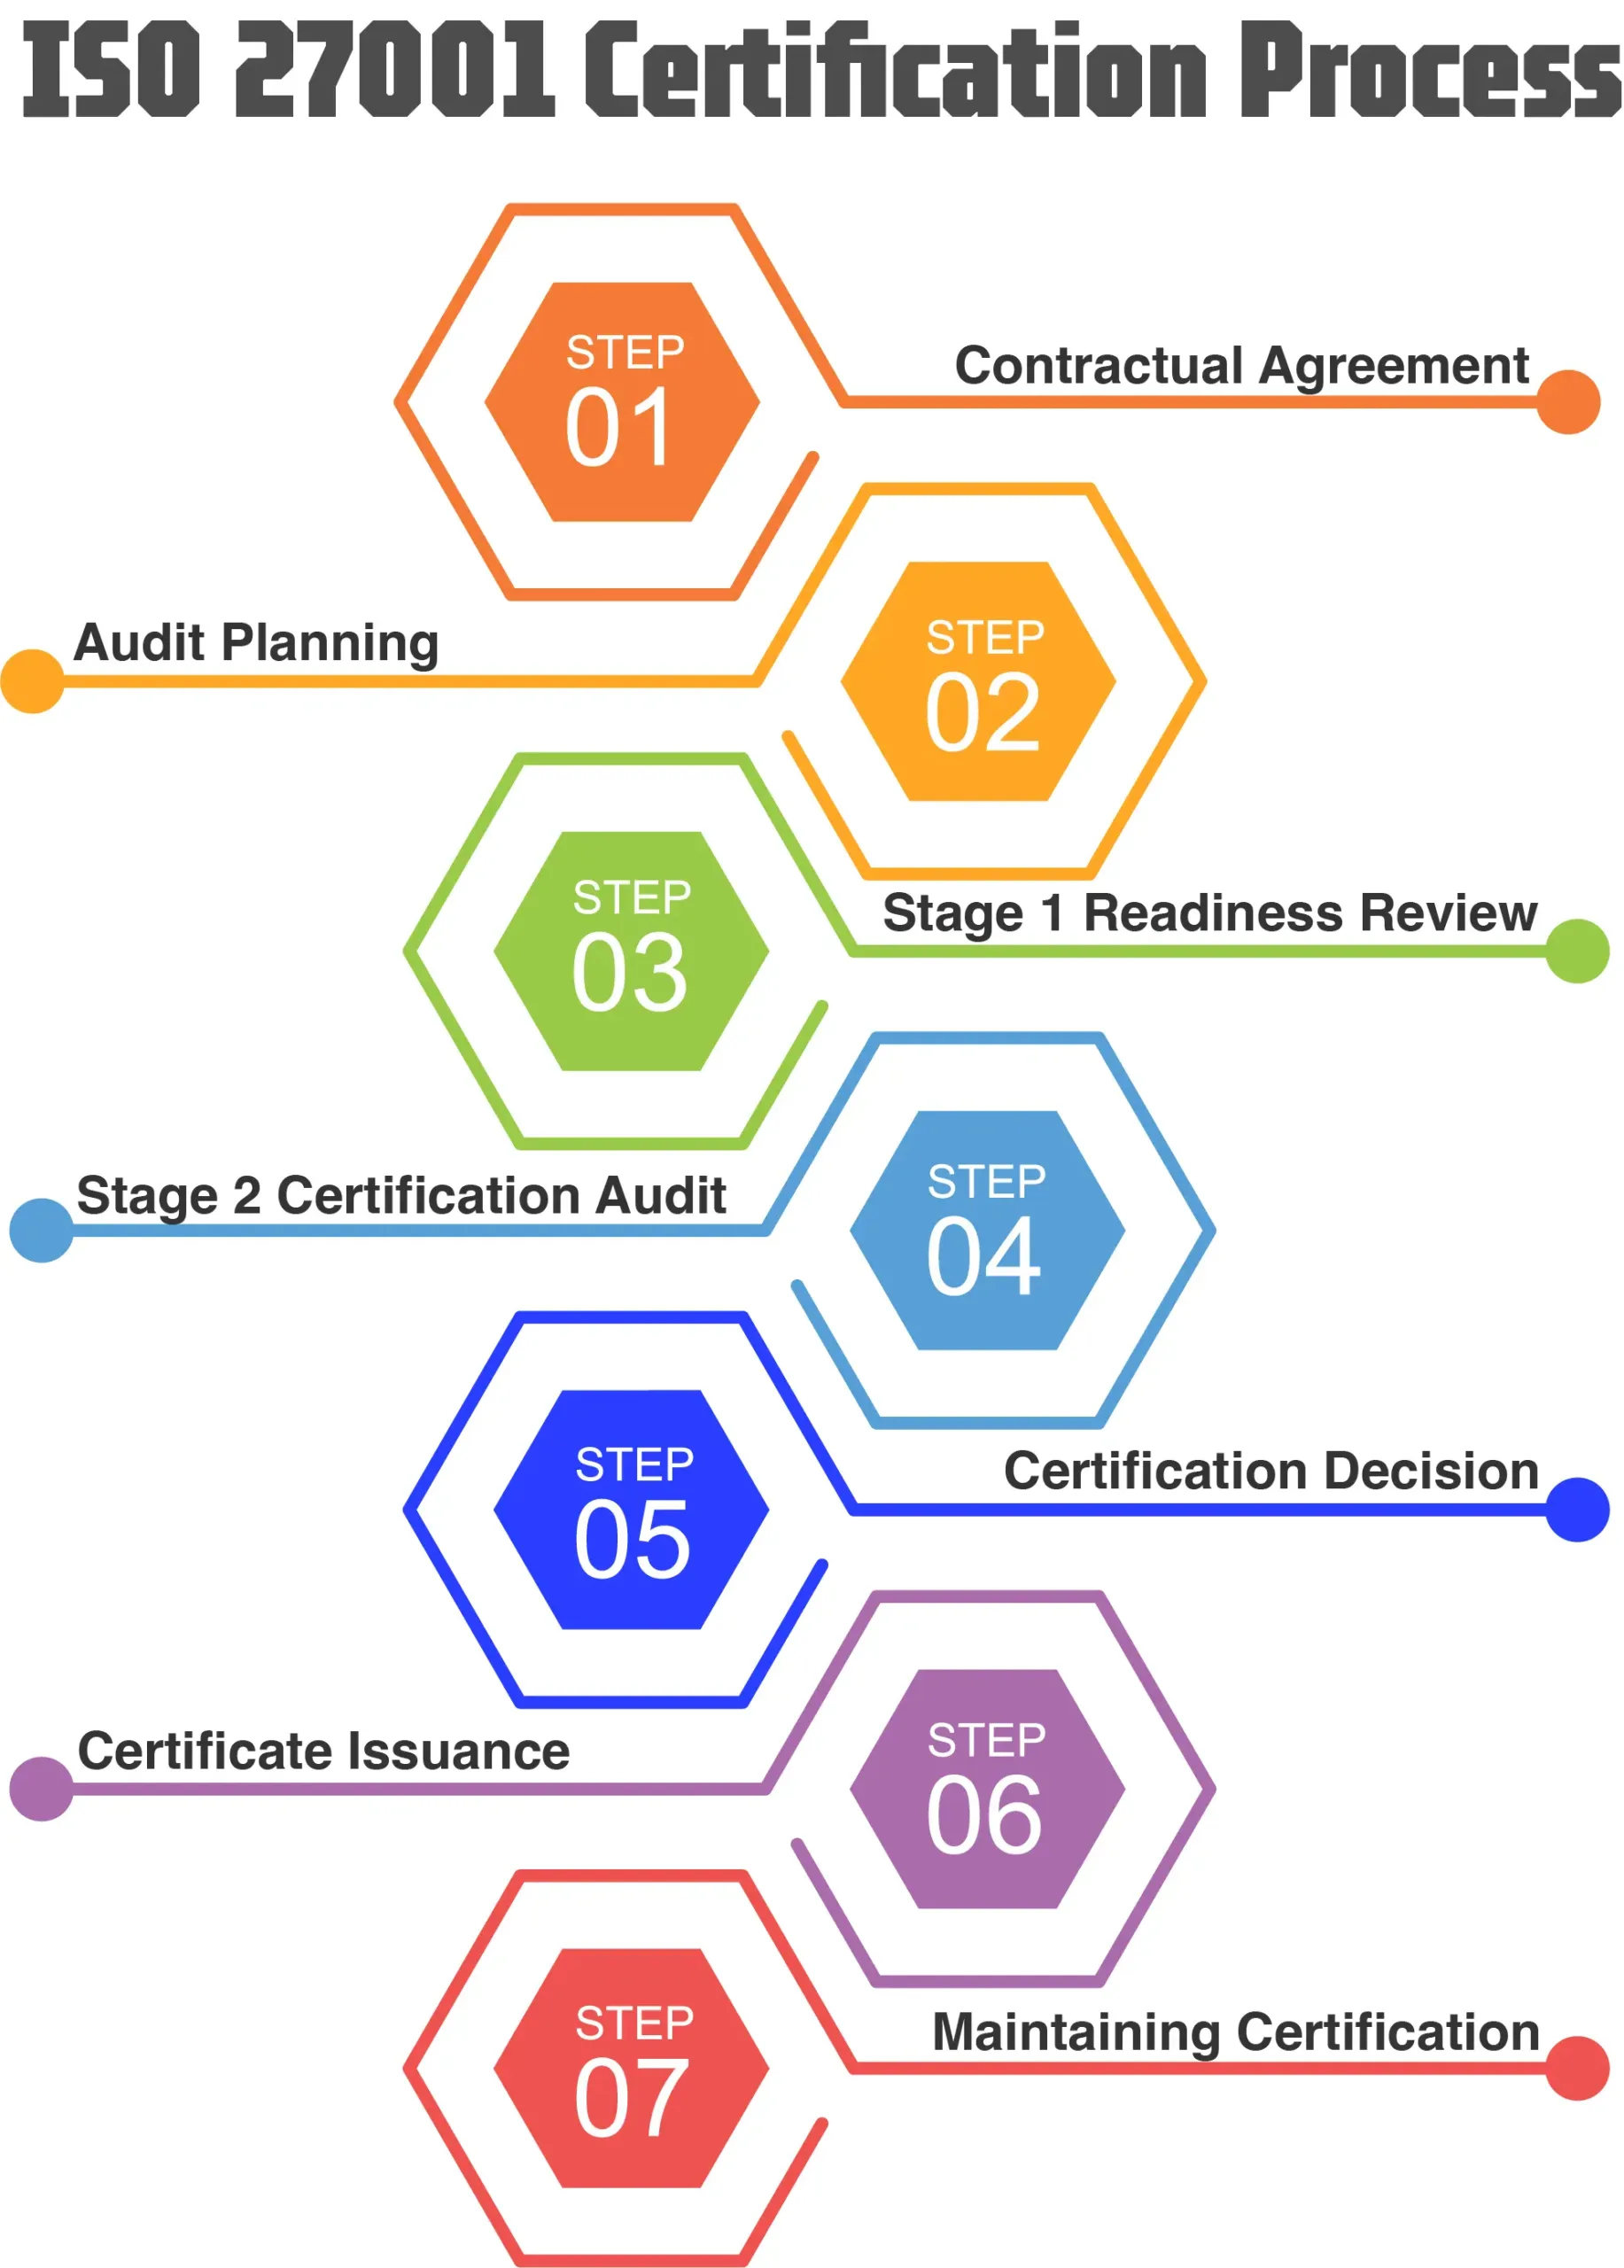 Image shows the certification process for ISO/IEC 27001